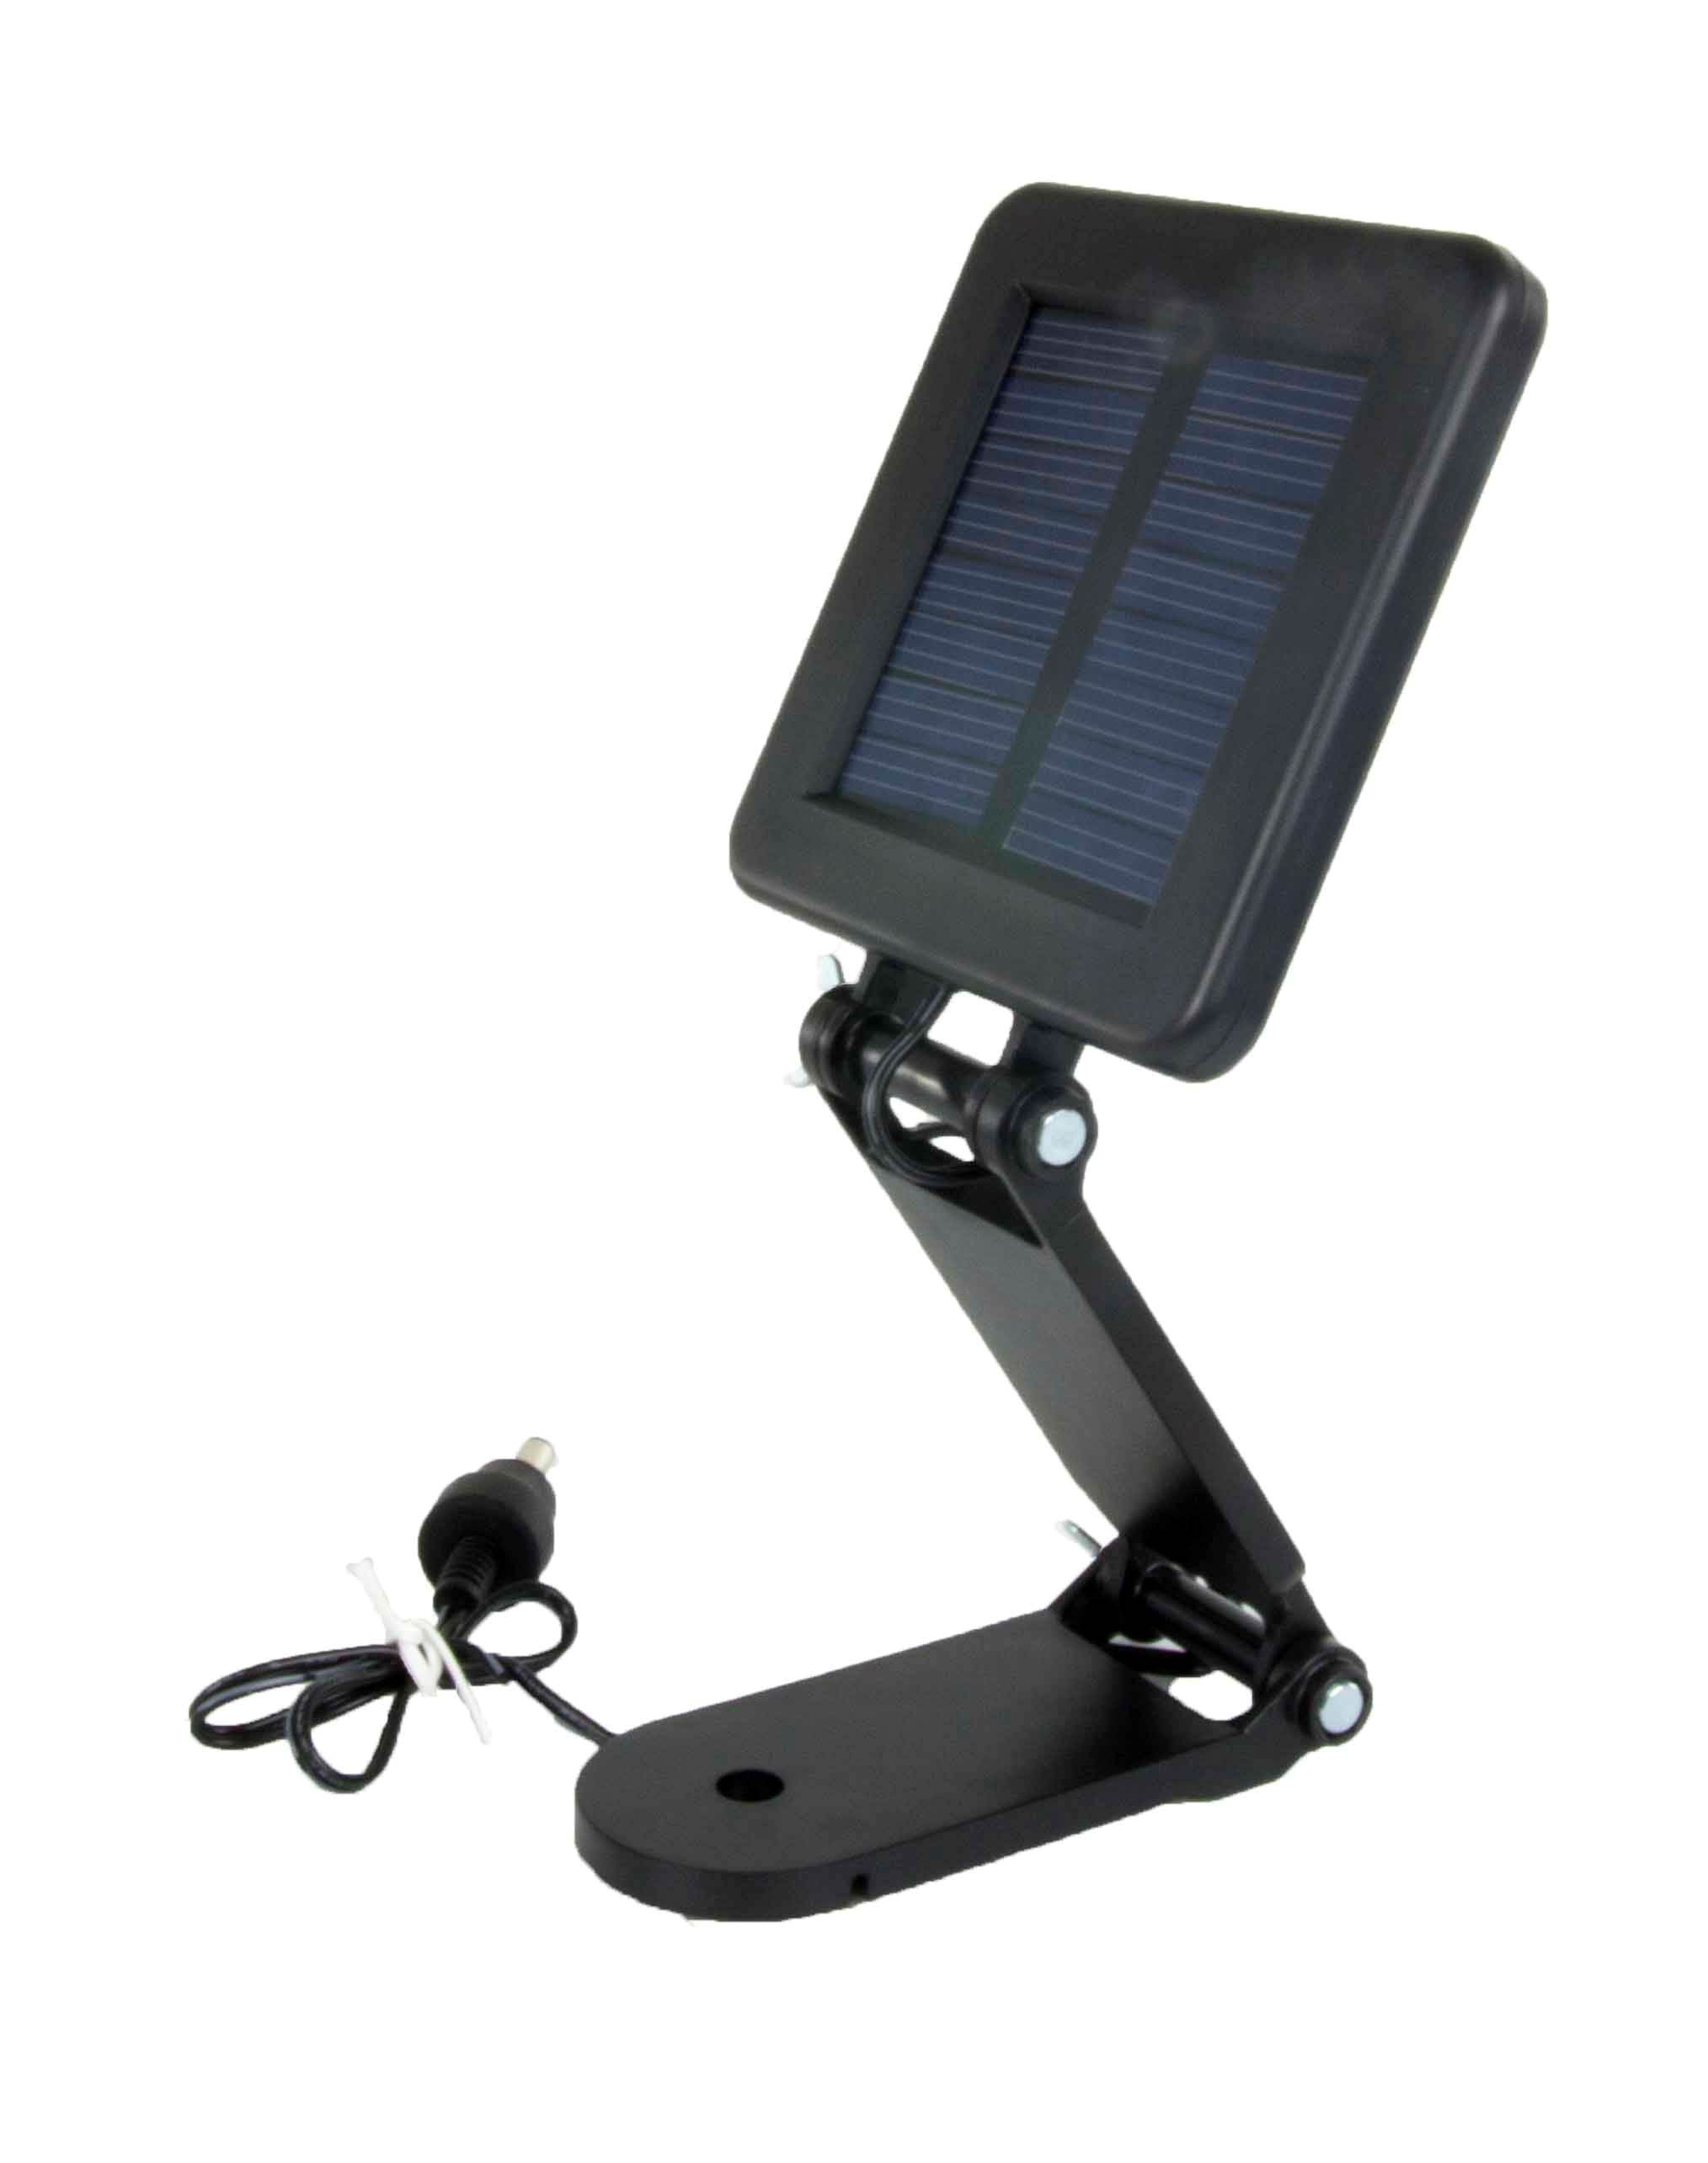 NEW! MOULTRIE Game Feeder 6 Volt Deluxe Solar Power Panel w/ Mounting Bracket - image 2 of 5